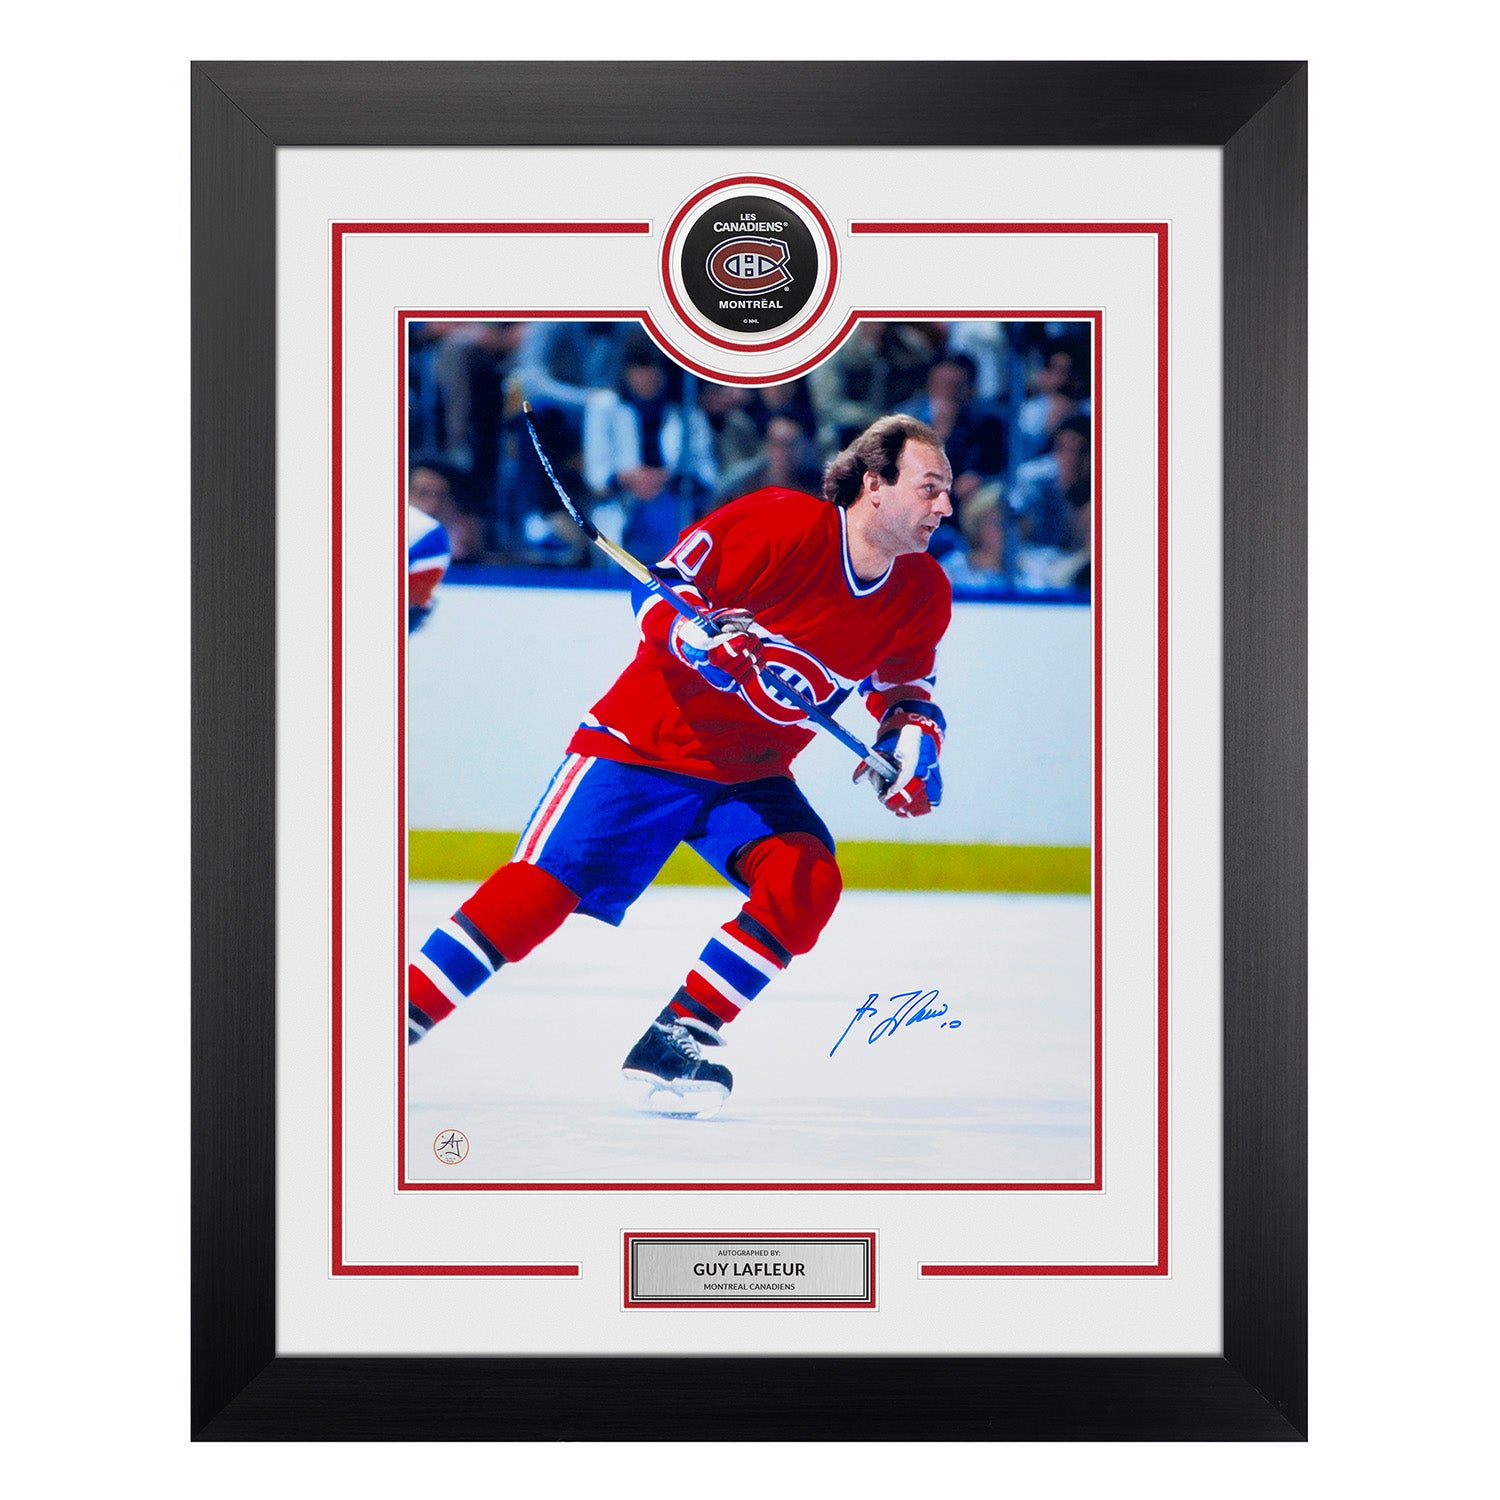 Guy LaFleur Signed Montreal Canadiens Puck Display 26x32 Frame